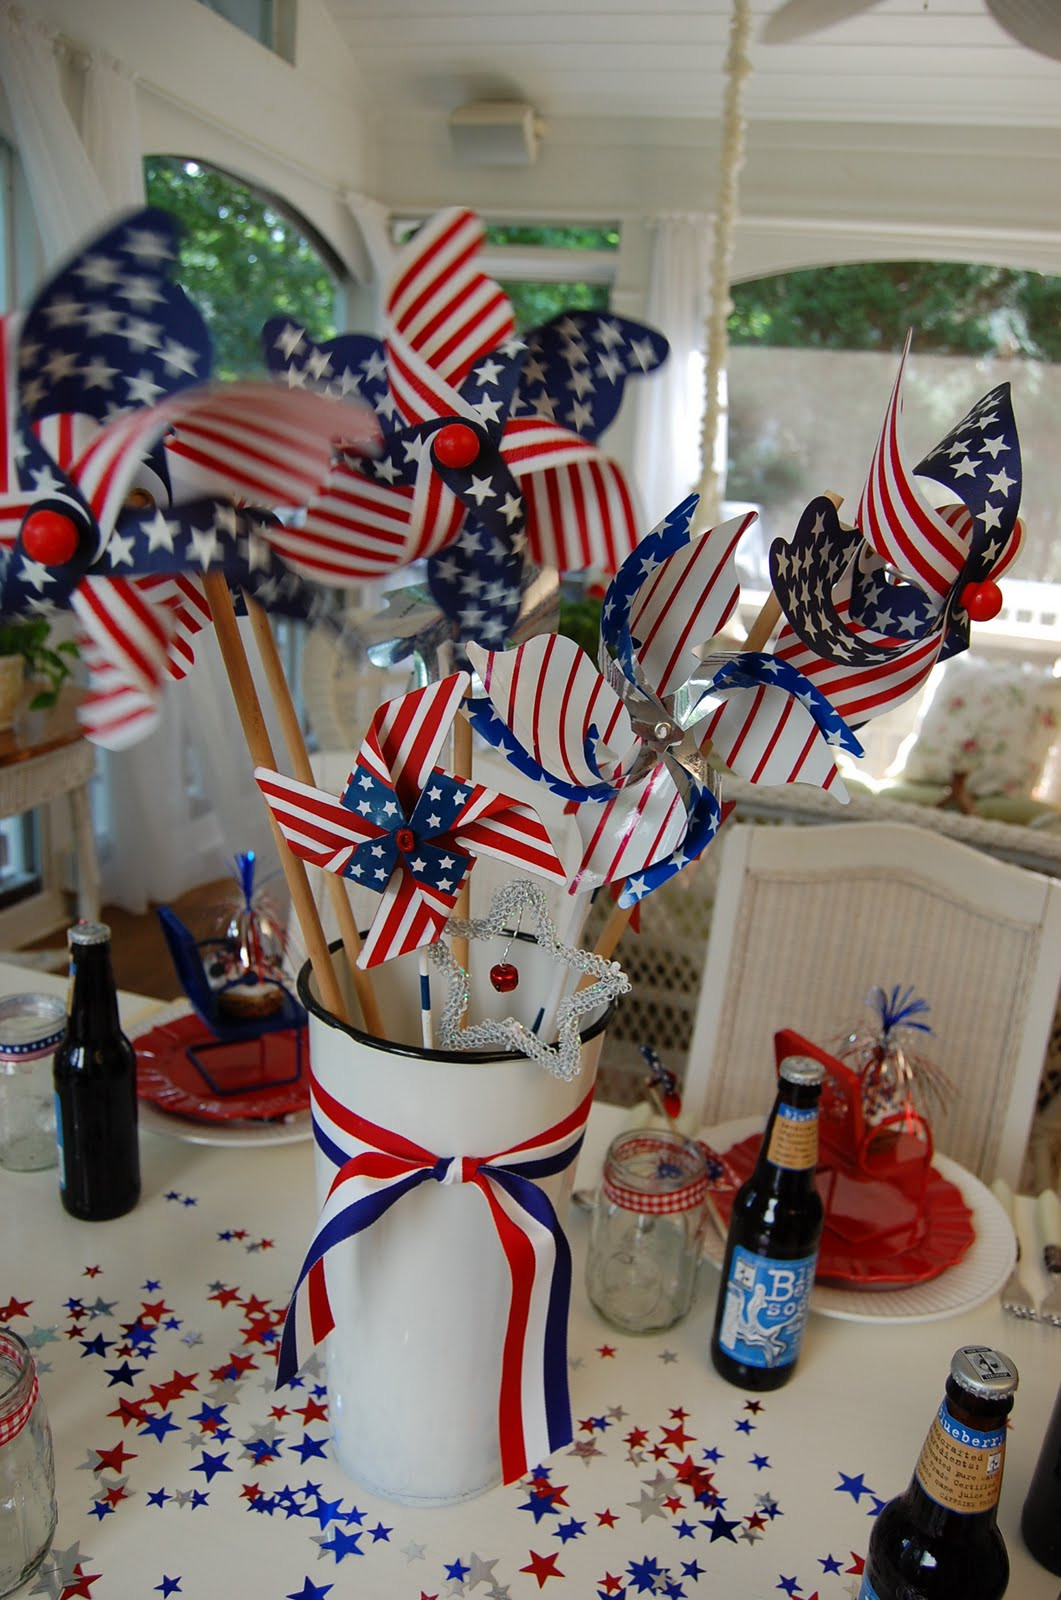 4th Of July Decor
 A Patriotic Celebration Table Setting